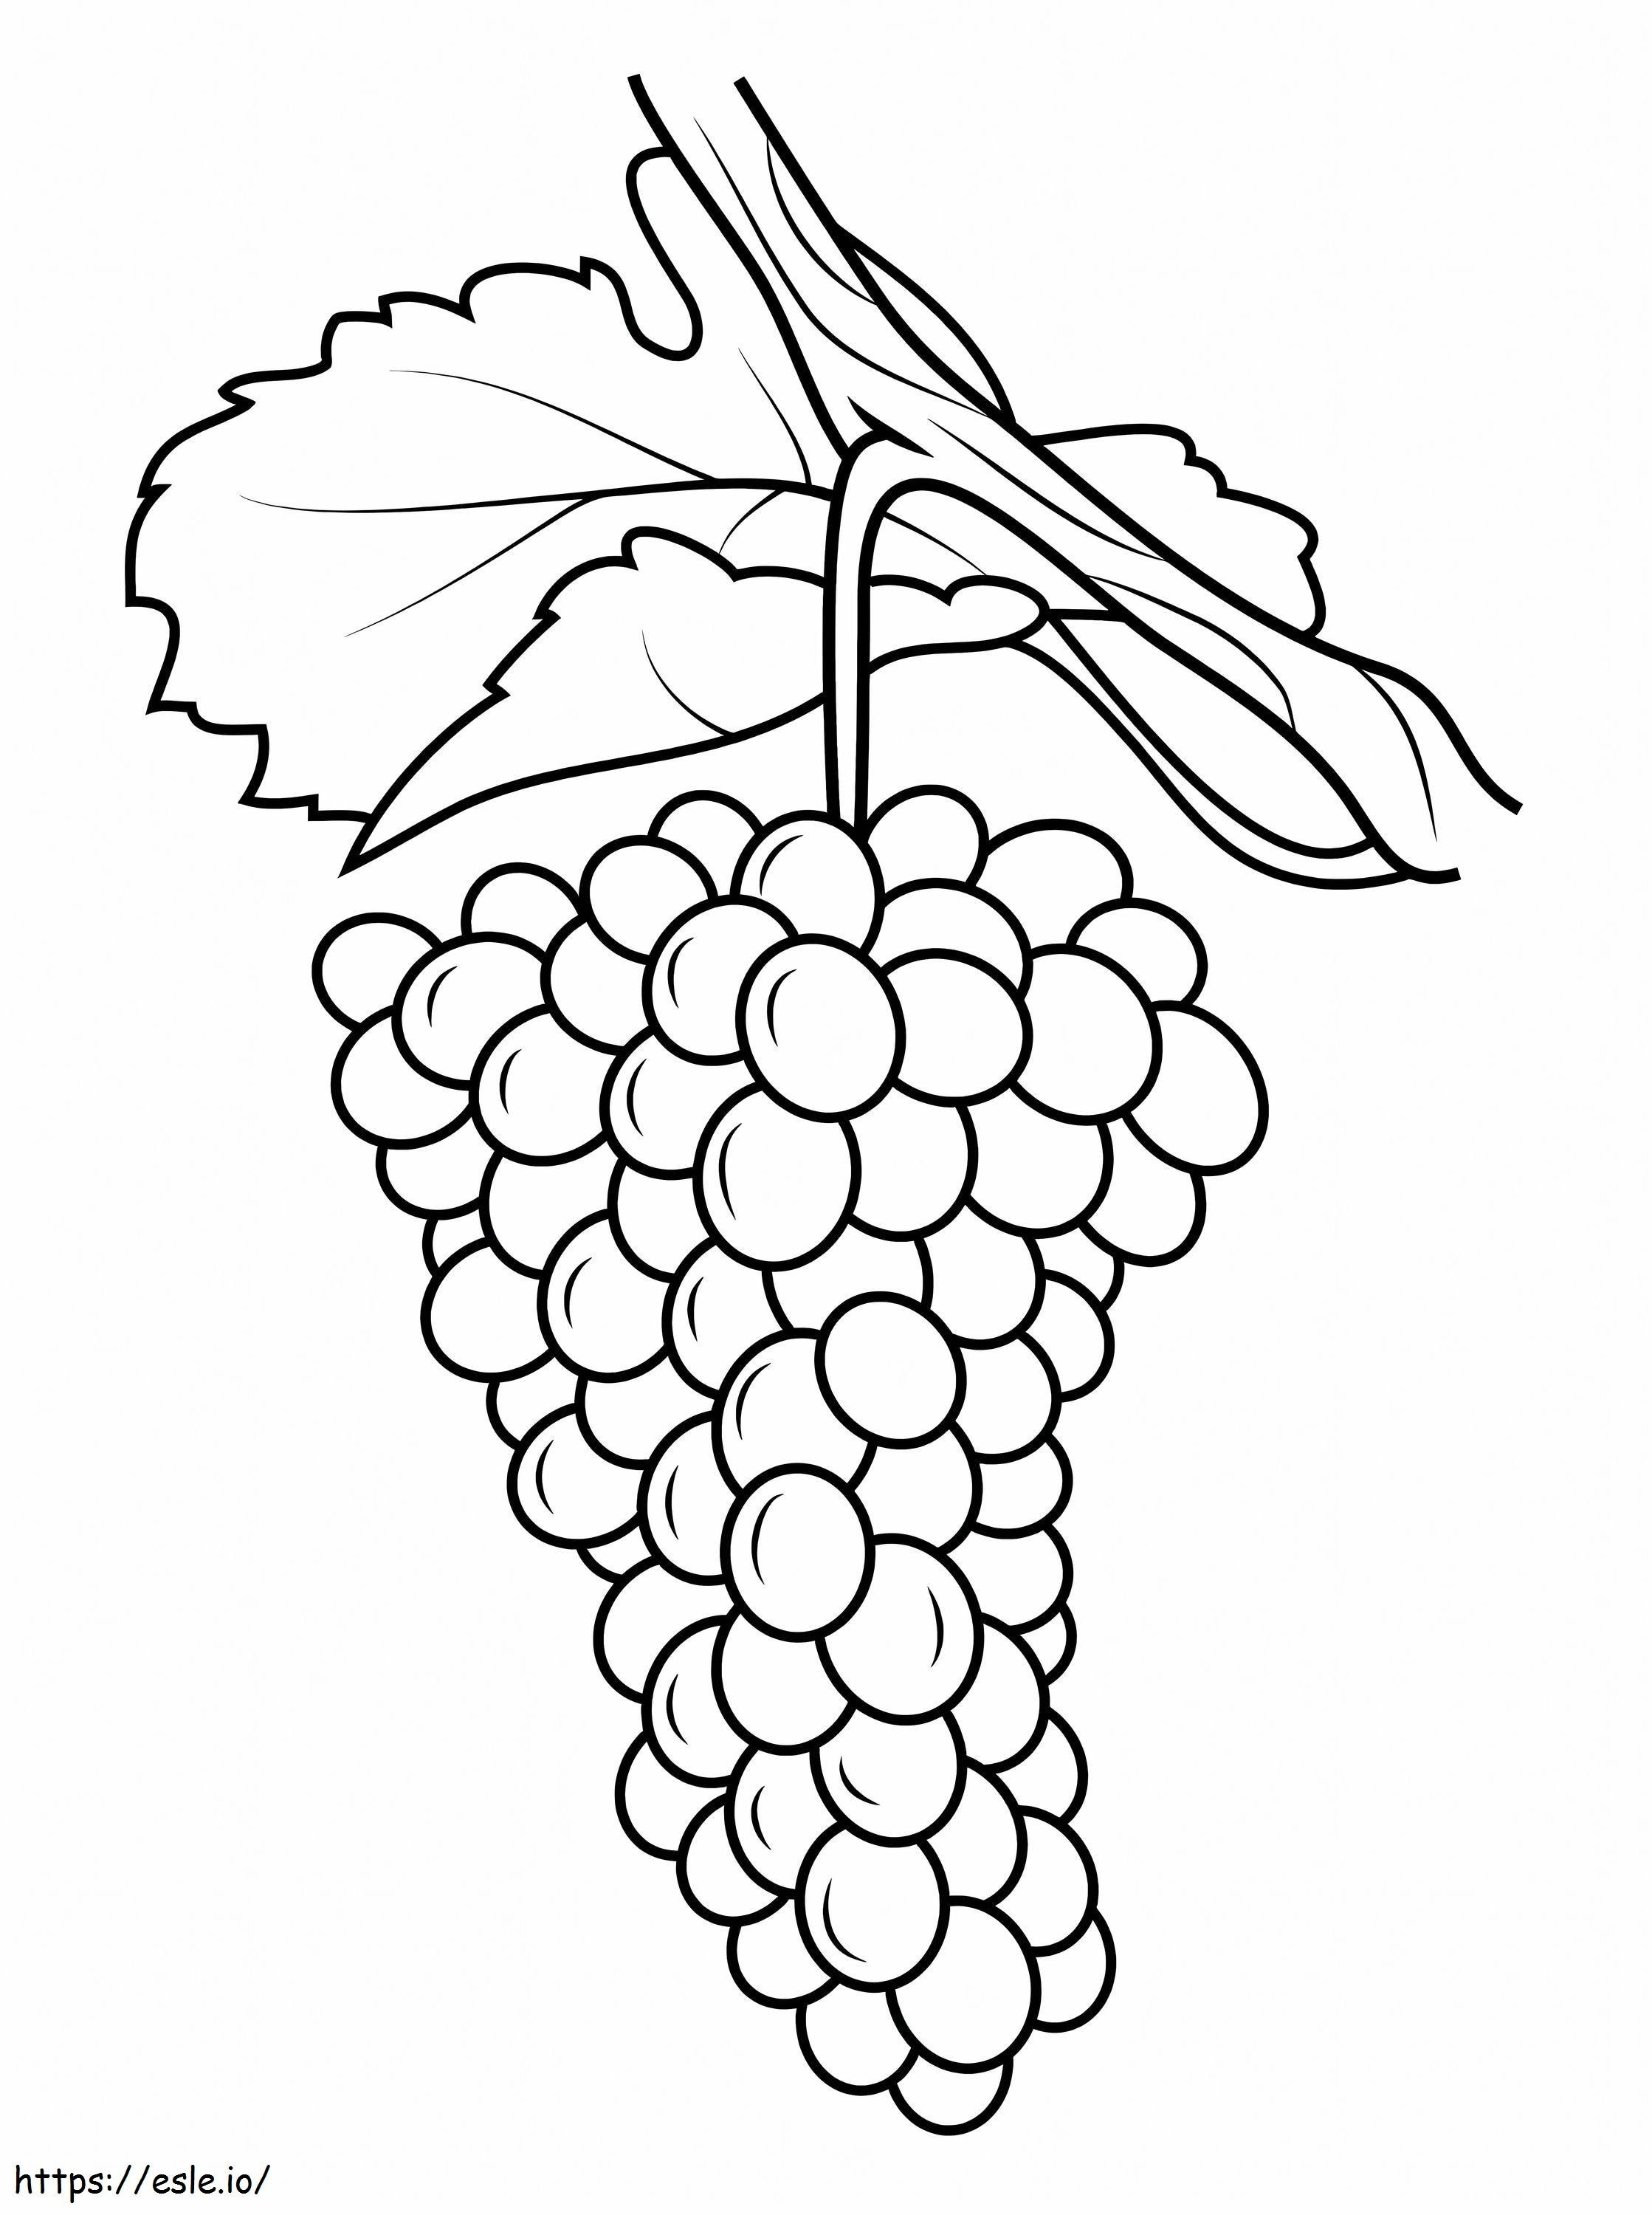 Amazing Grapes coloring page